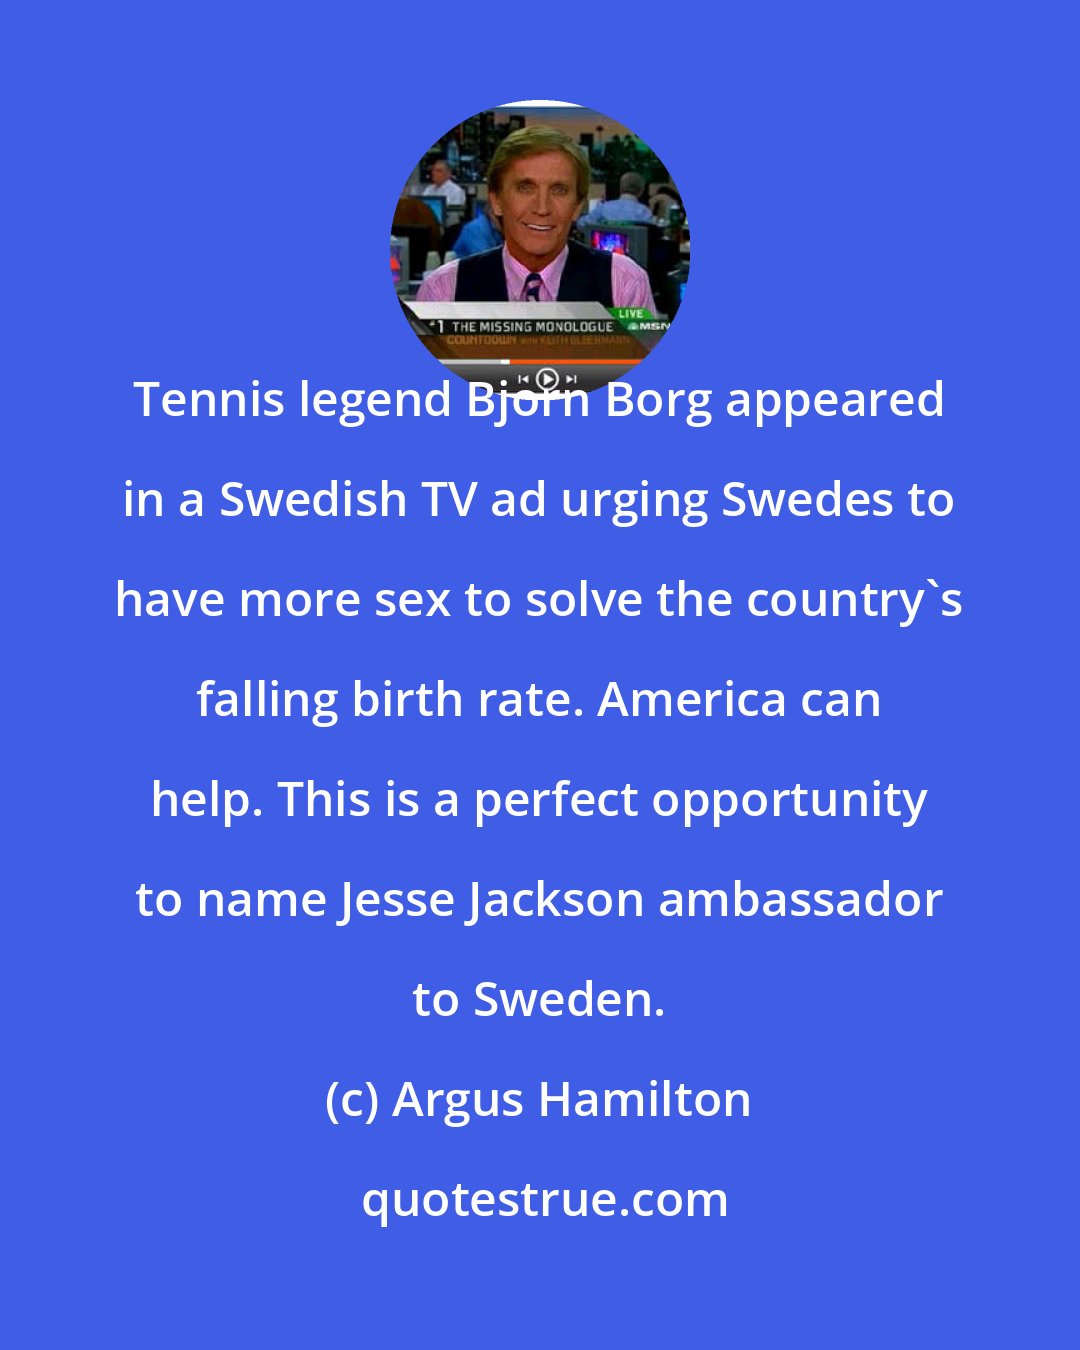 Argus Hamilton: Tennis legend Bjorn Borg appeared in a Swedish TV ad urging Swedes to have more sex to solve the country's falling birth rate. America can help. This is a perfect opportunity to name Jesse Jackson ambassador to Sweden.